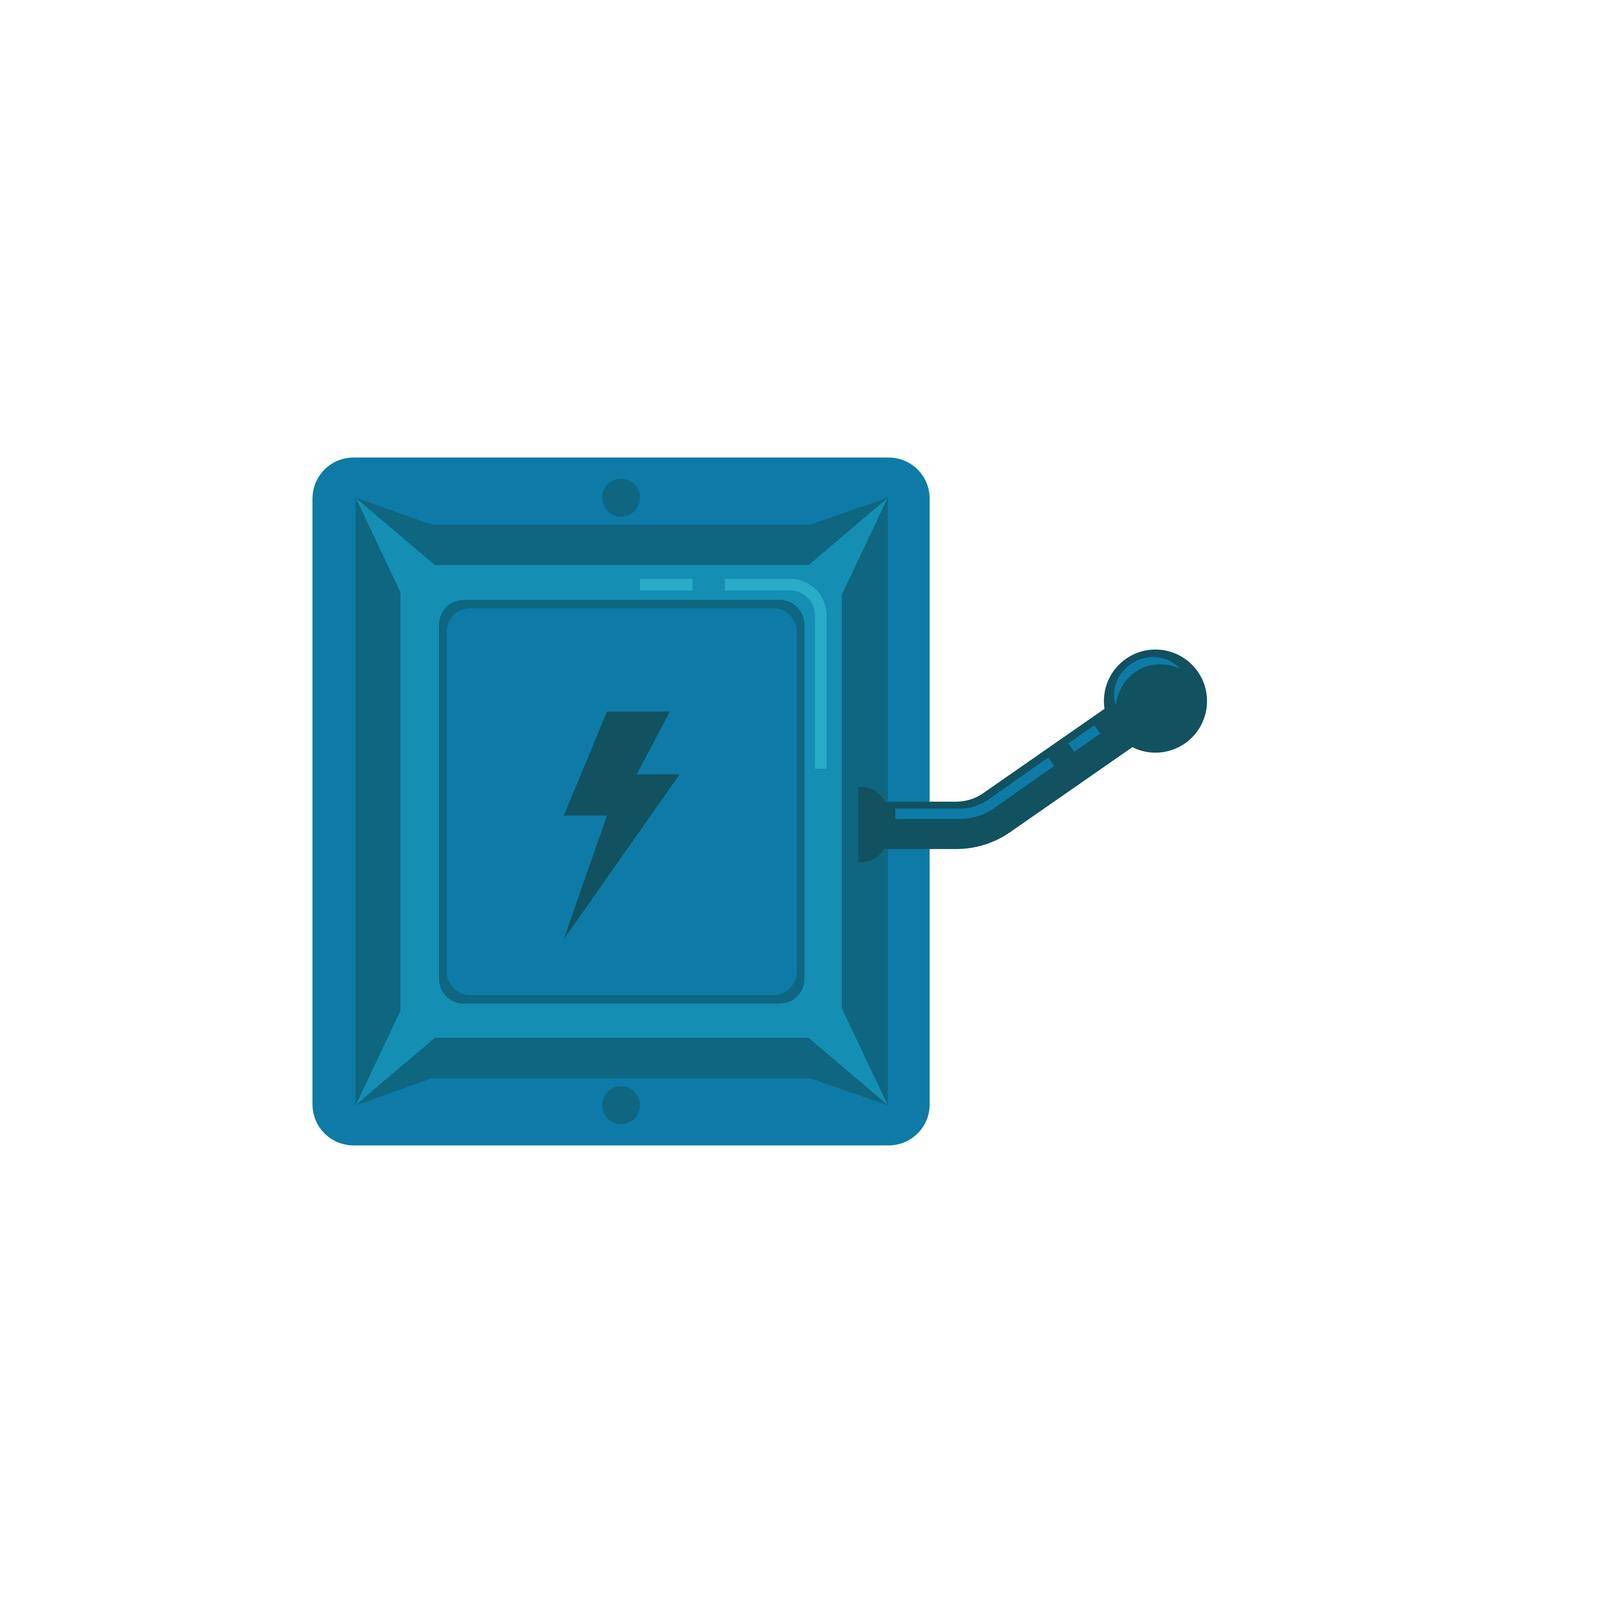 electric switch cartoon  vector icon element    design by idan